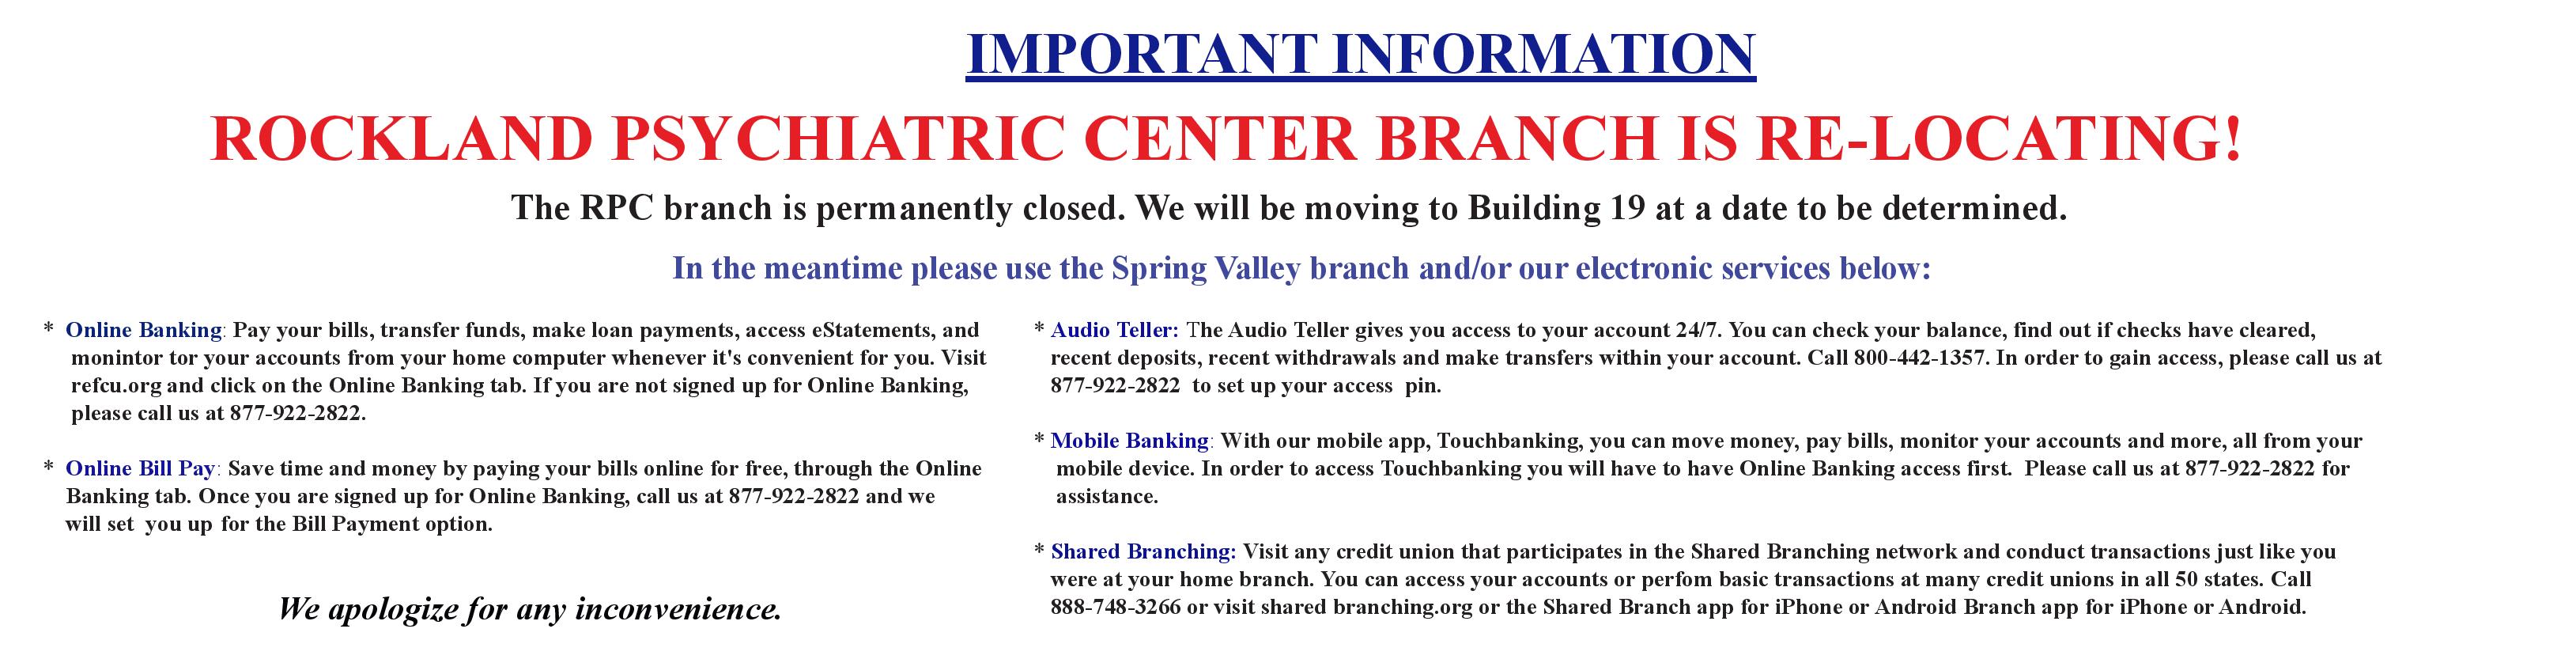 Effective February 13th the current RPC branch is relocation. It will reopen in Building 19 at a date to be determined